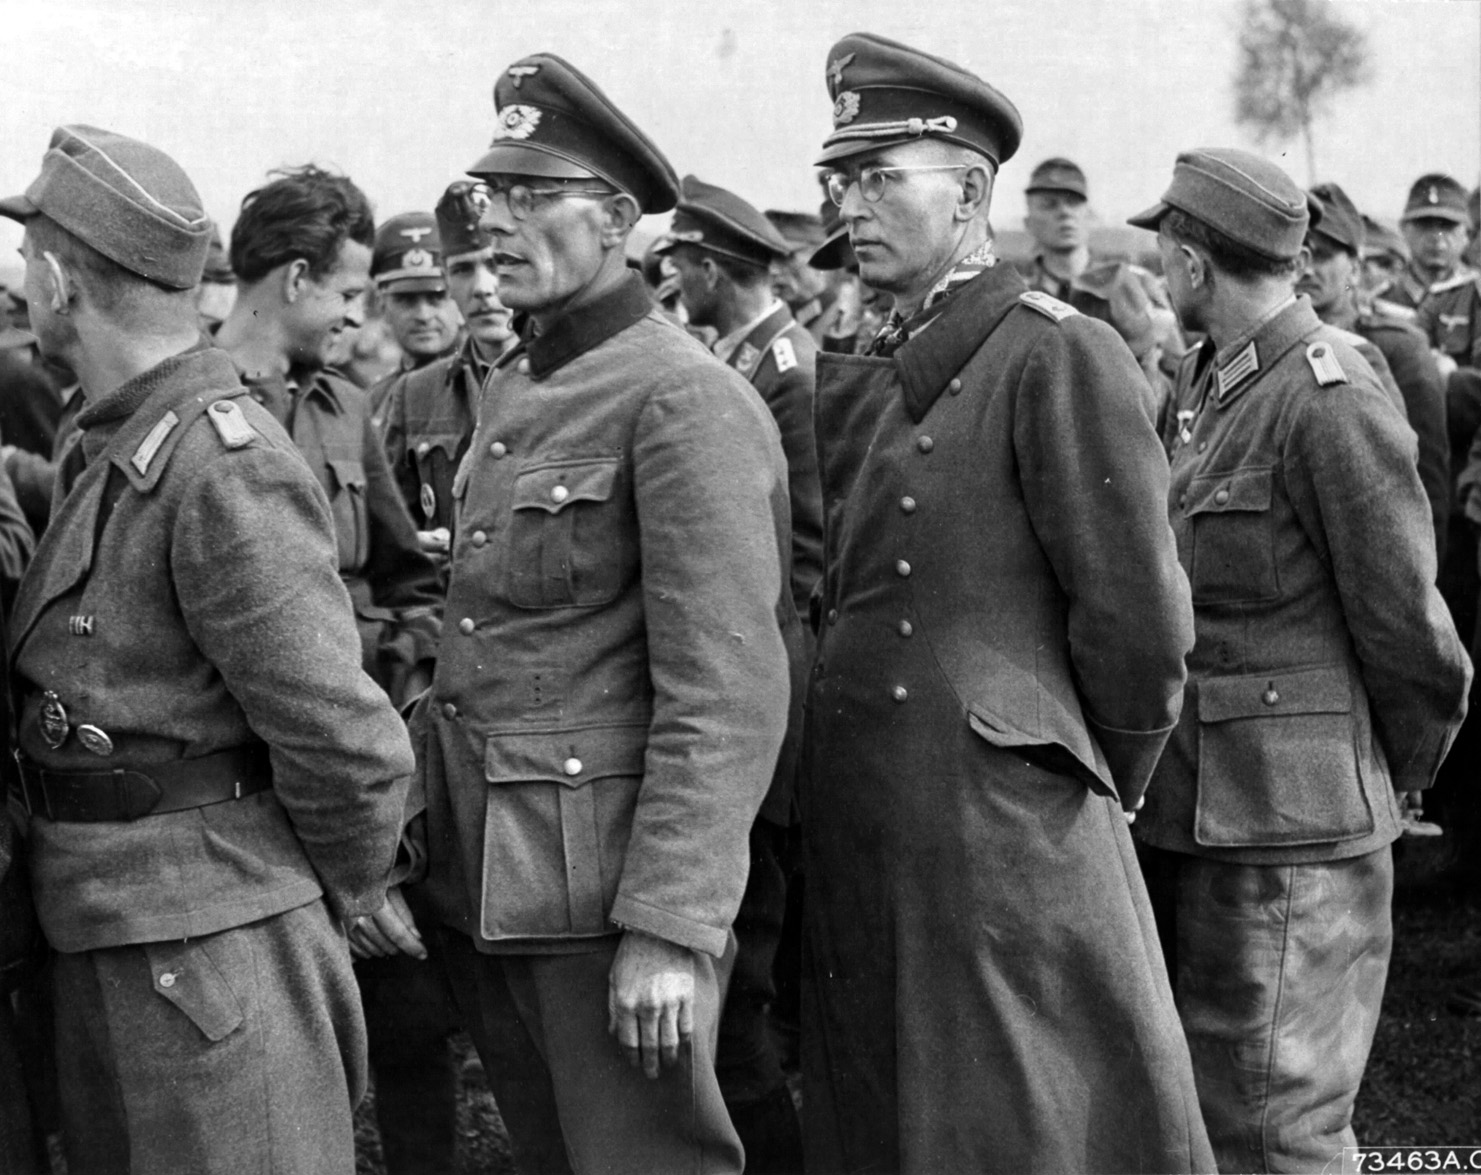 German Army officers stand in line for processing after their surrender in 1945. Most officers below the rank of colonel were allowed to go home after a brief period of captivity.